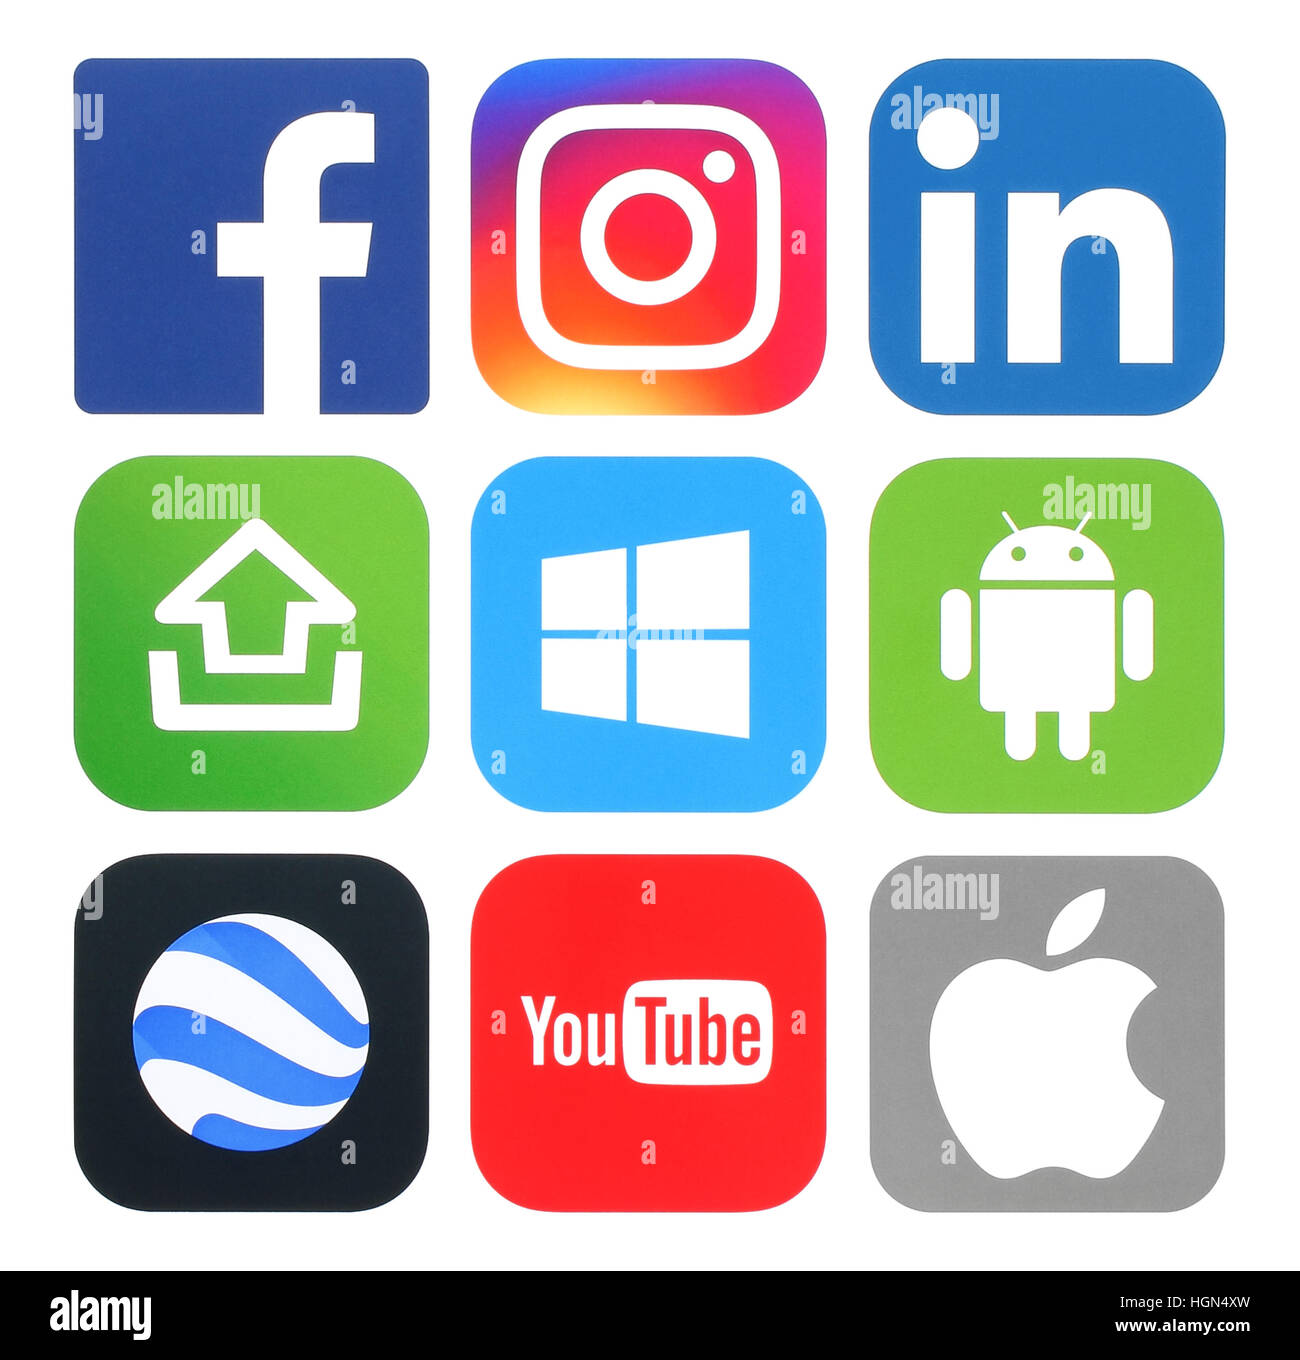 Kiev, Ukraine - May 20, 2016: Collection of popular social media, photo, video, operating system, productivity and travel logos printed on white paper Stock Photo